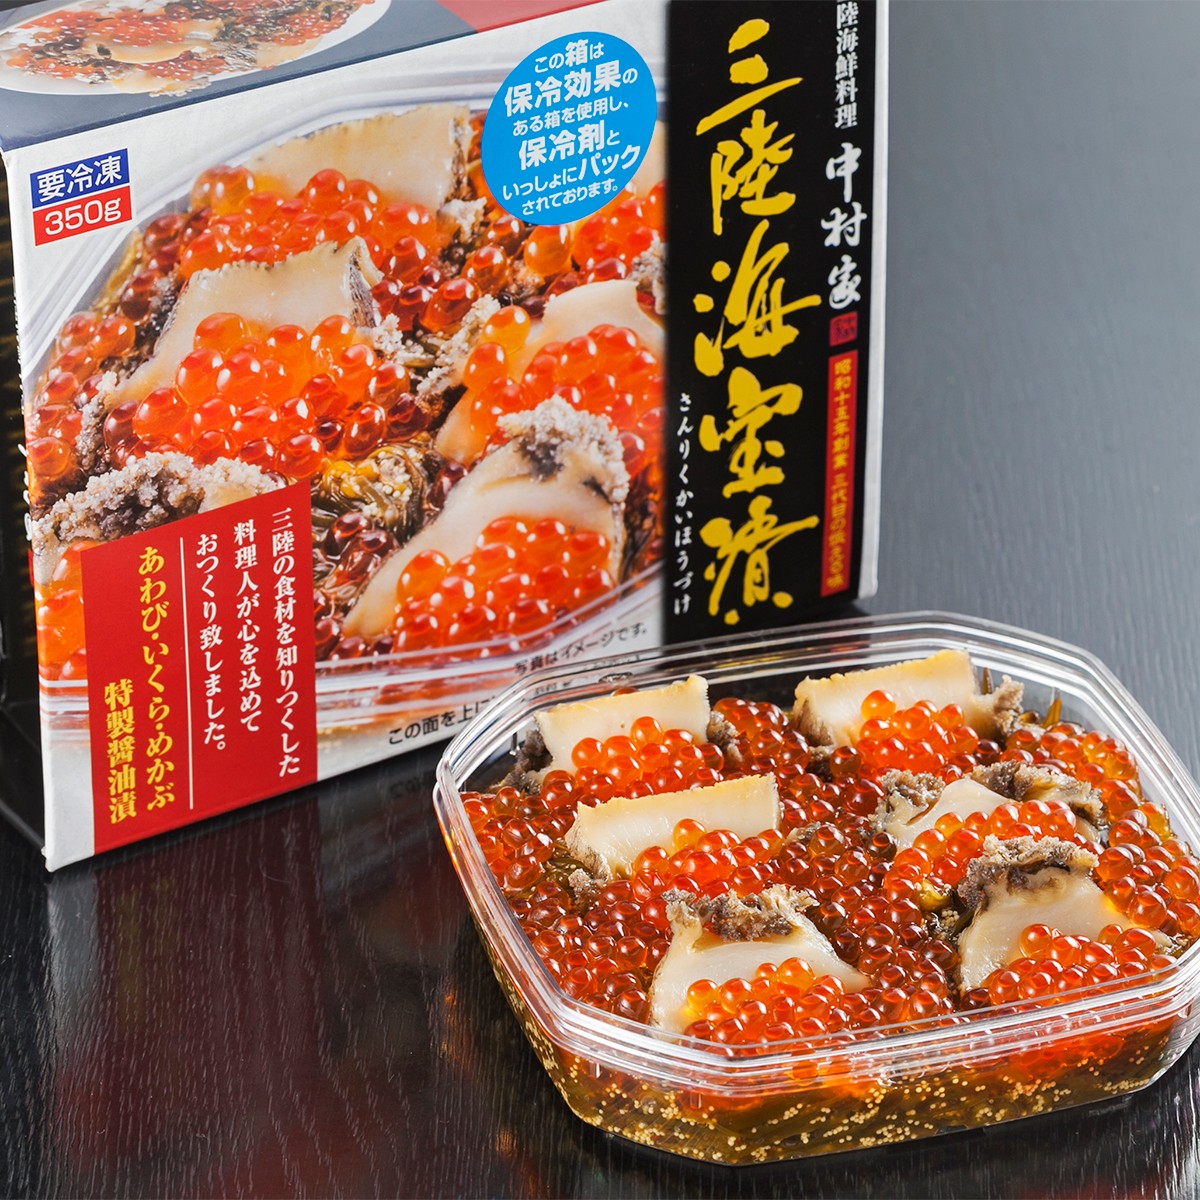  seafood .. Nakamura house three land sea ..350g excellent delivery your order . earth production gift present special product Mother's Day recommendation 